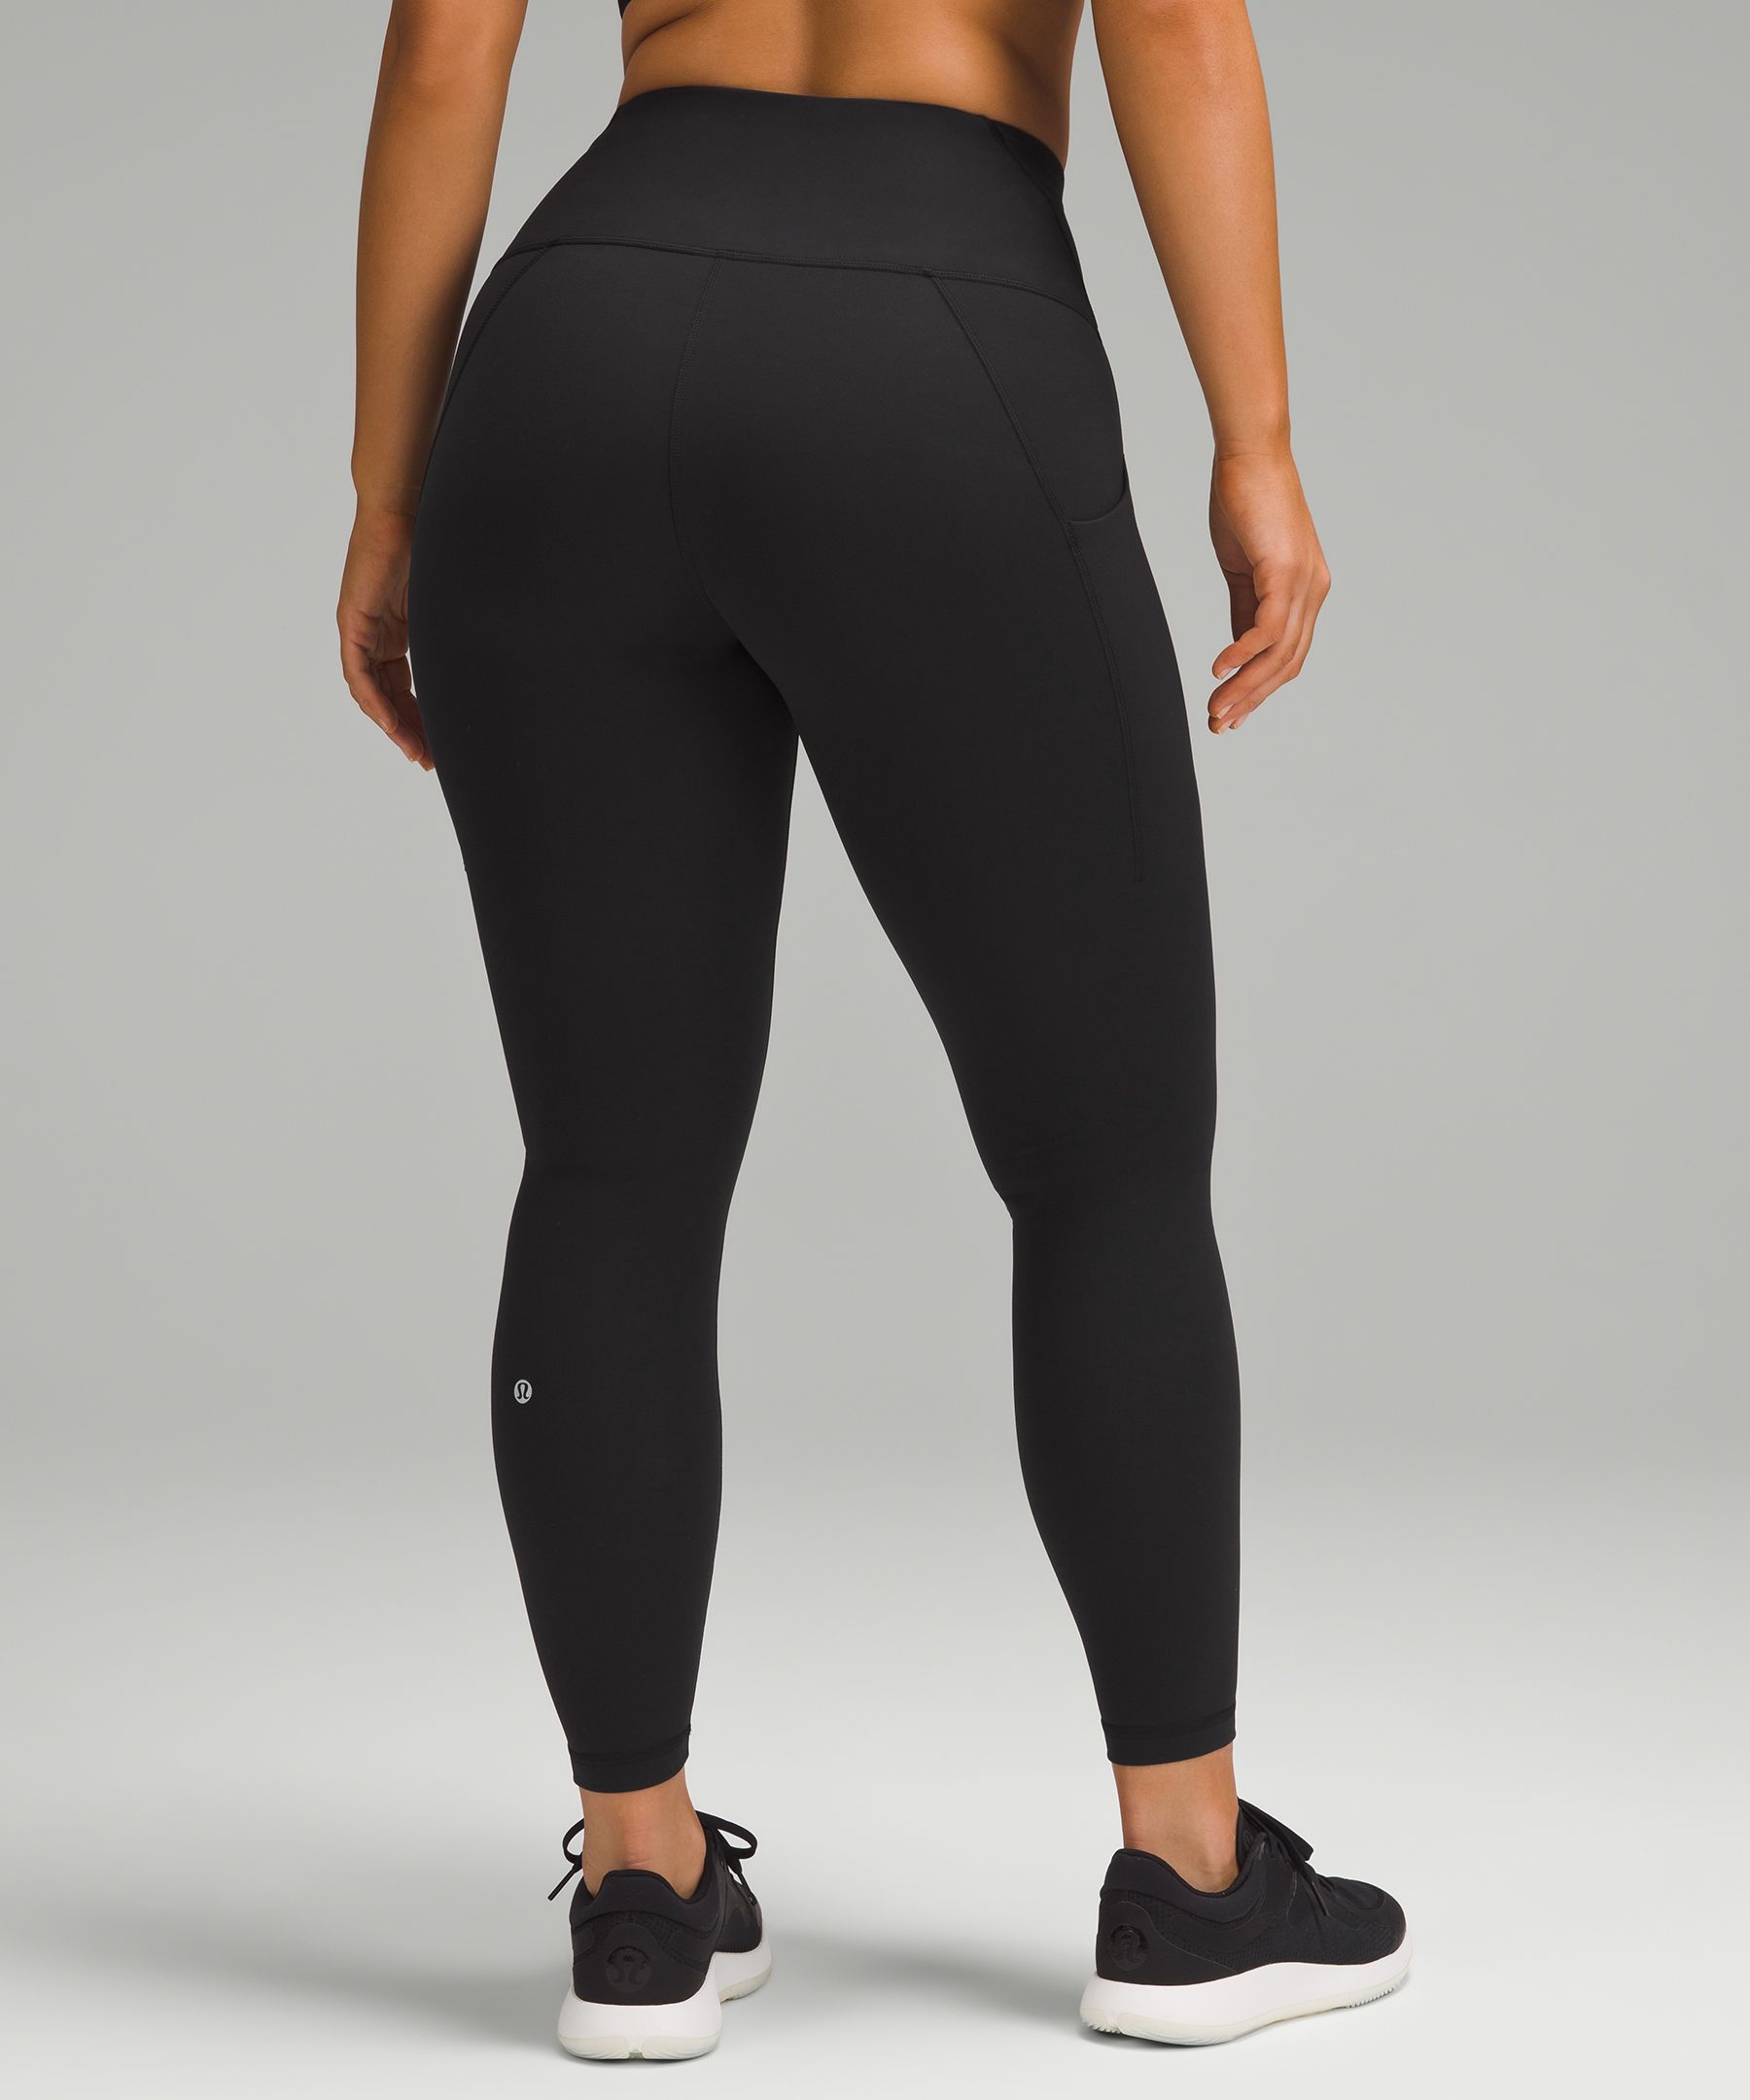 Lululemon athletica Wunder Train Contour Fit High-Rise Tight with